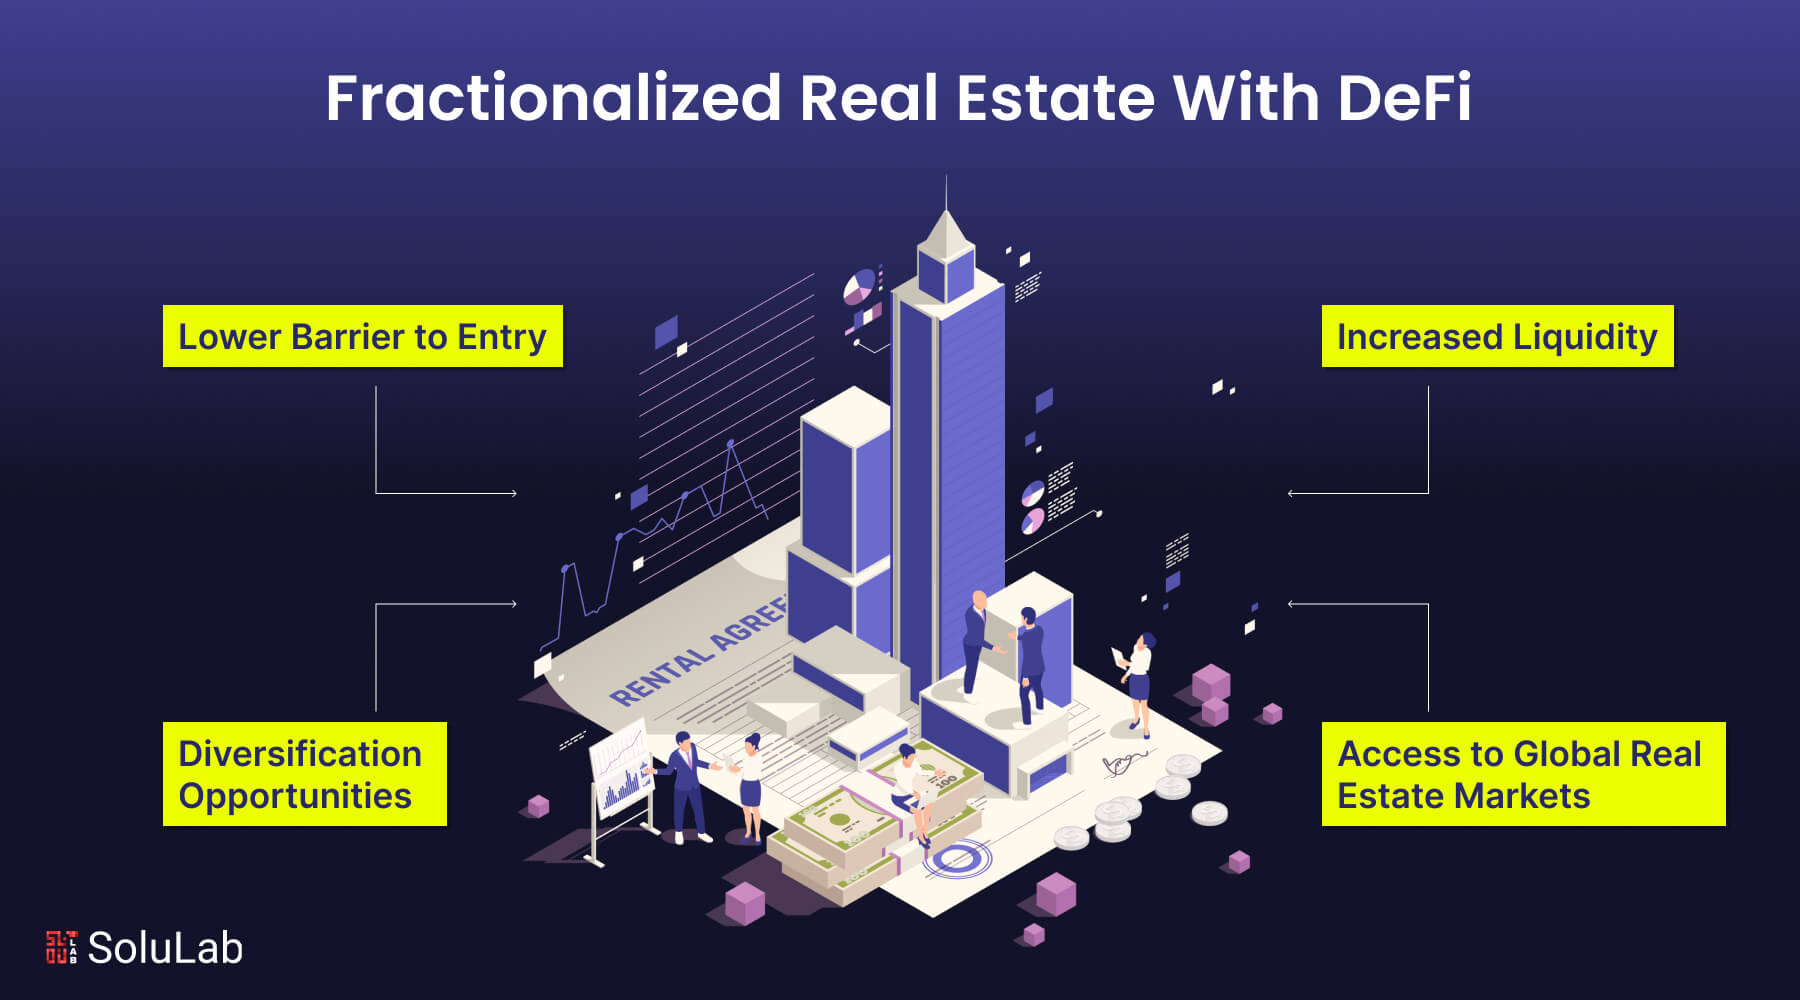 Guide to Fractionalized Real Estate With DeFi